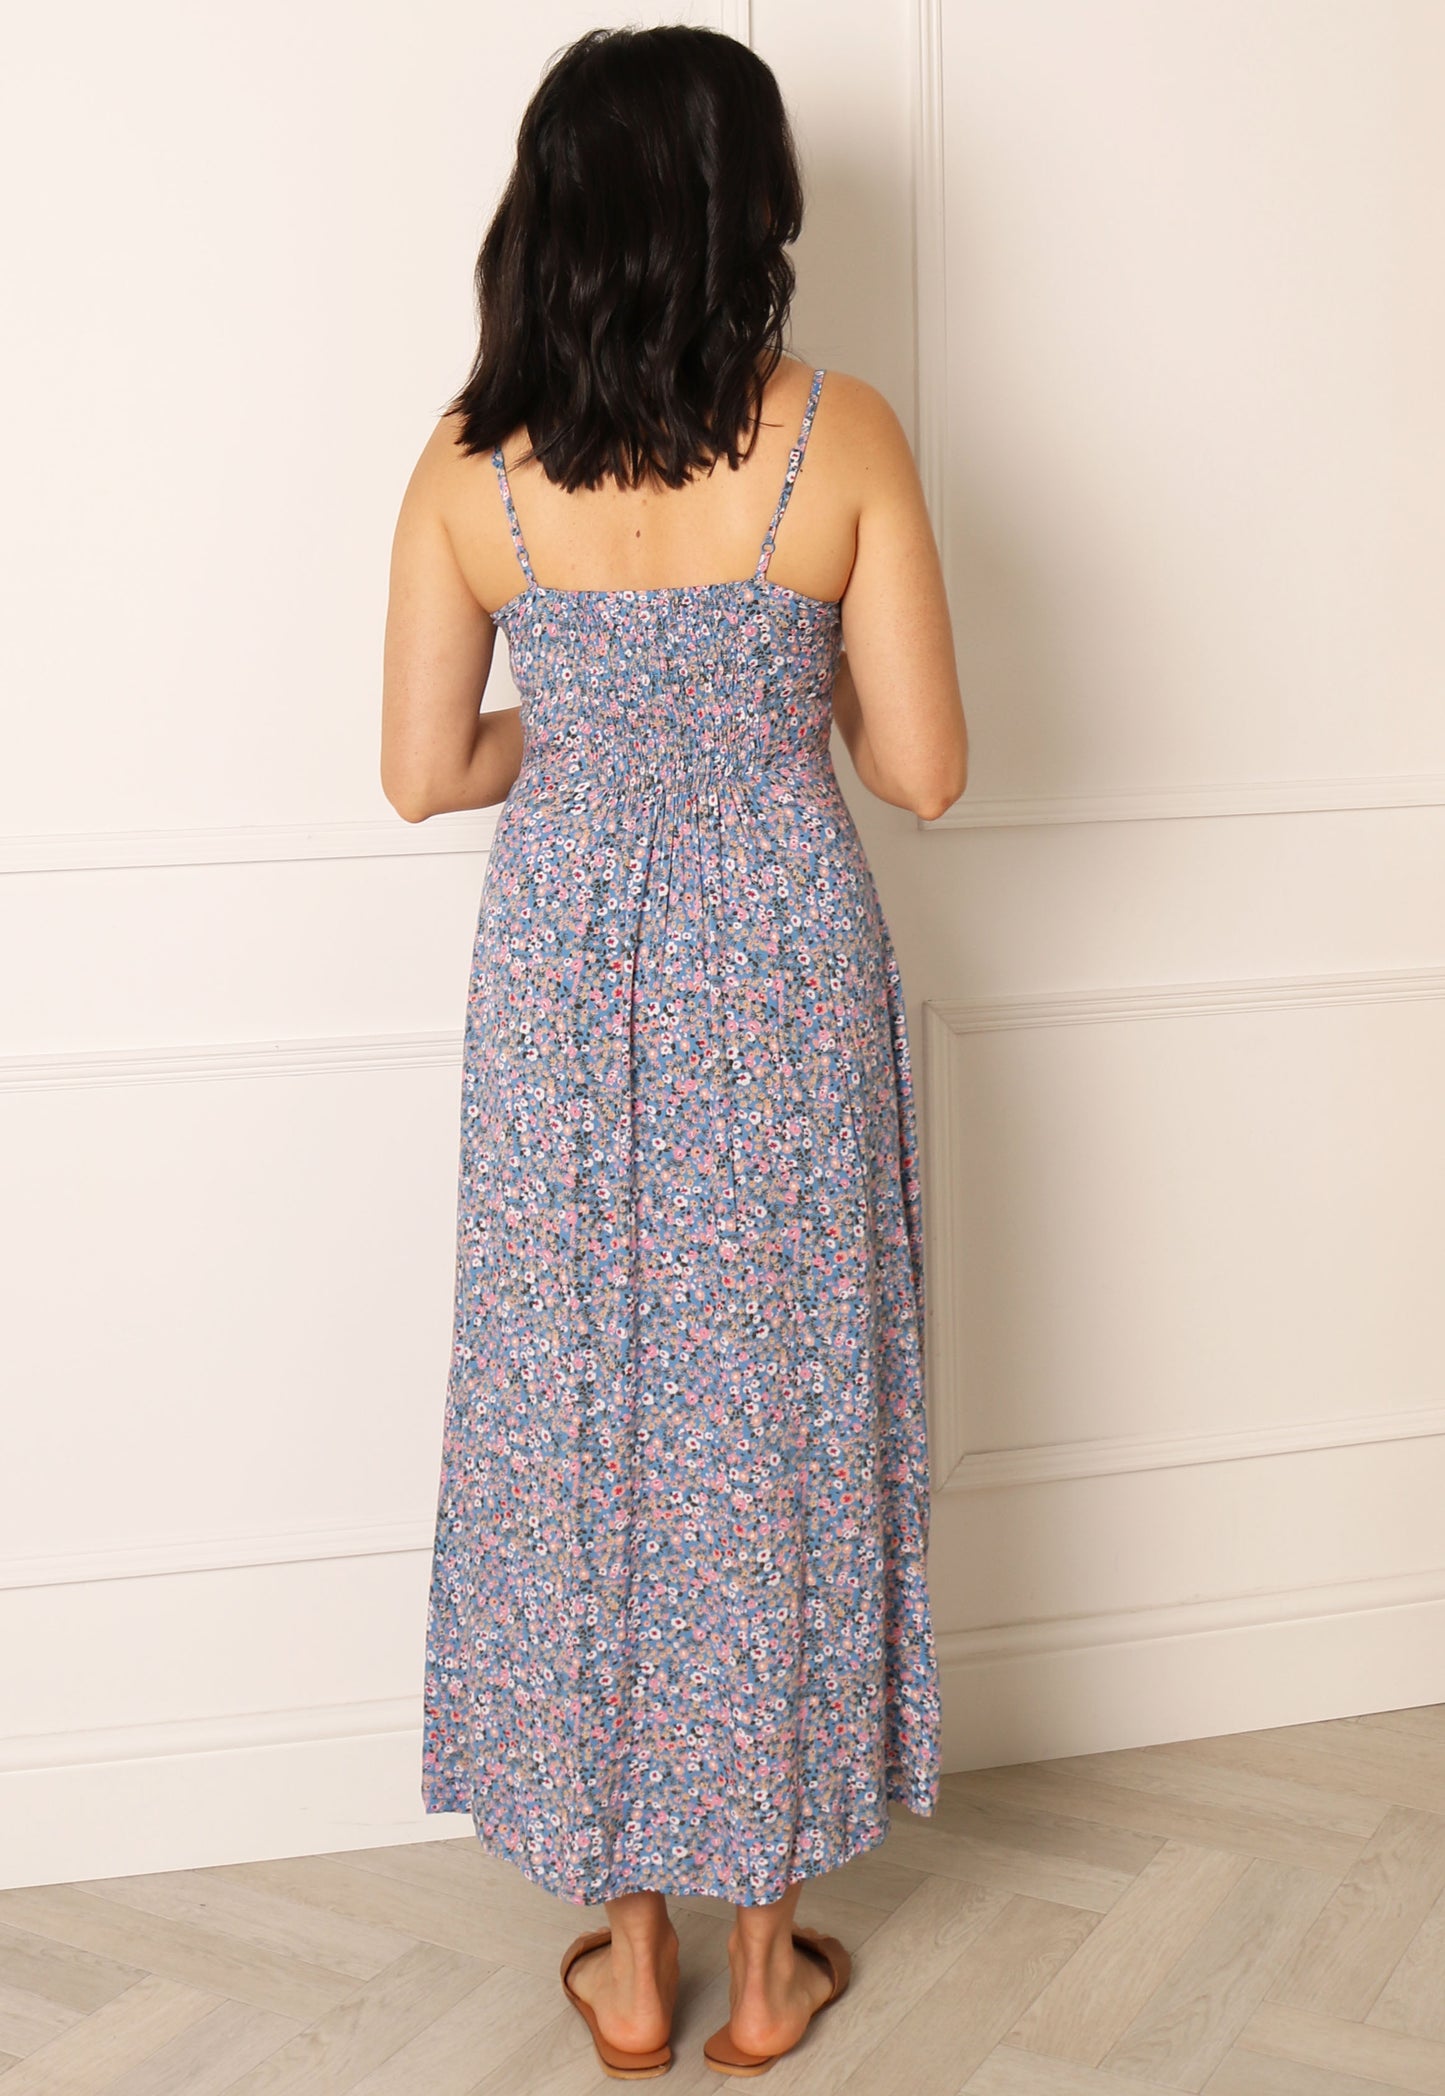 PIECES Nyx Strappy Ditsy Floral Print Midi Dress in Blue & Pink - One Nation Clothing